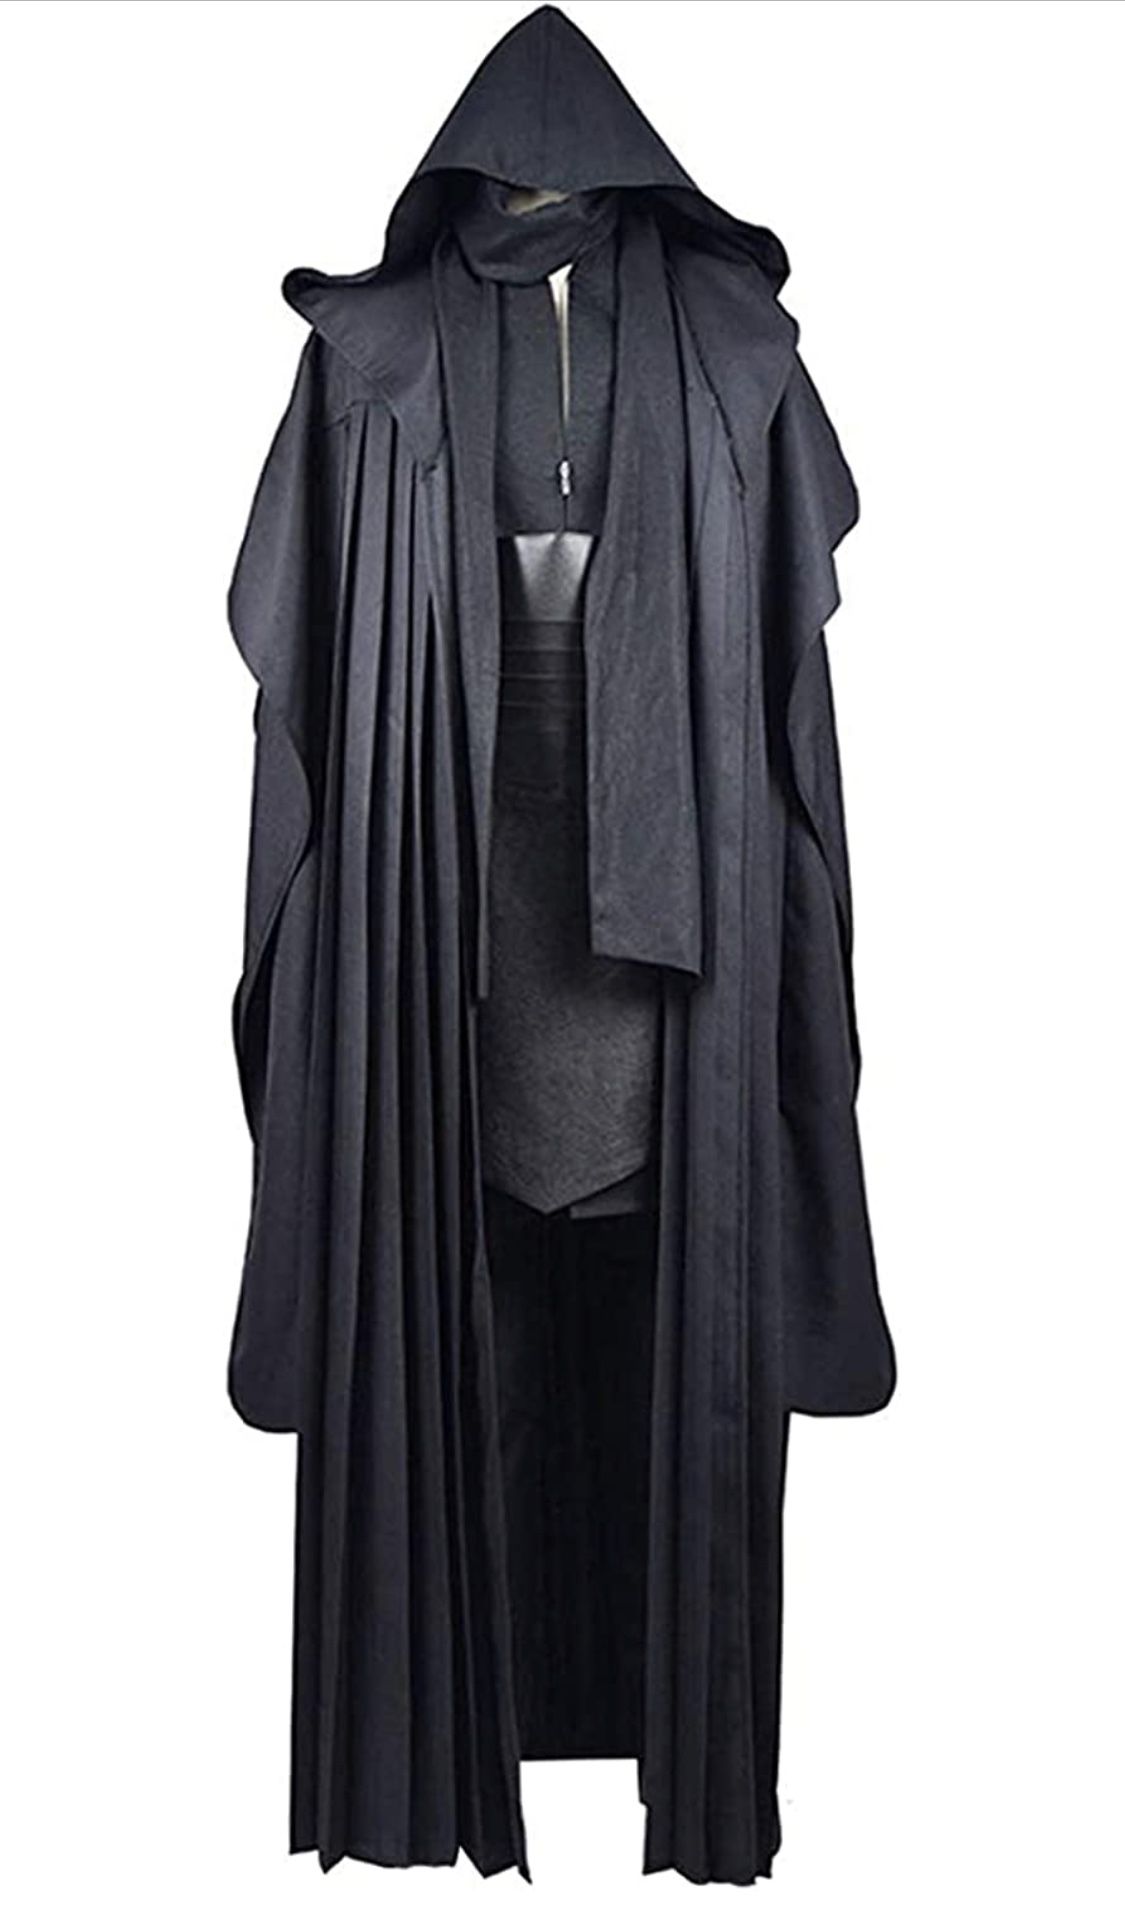 Men's Star Wars Darth Maul Black Outfit Tunic Robe Halloween Cosplay Costume (Small)